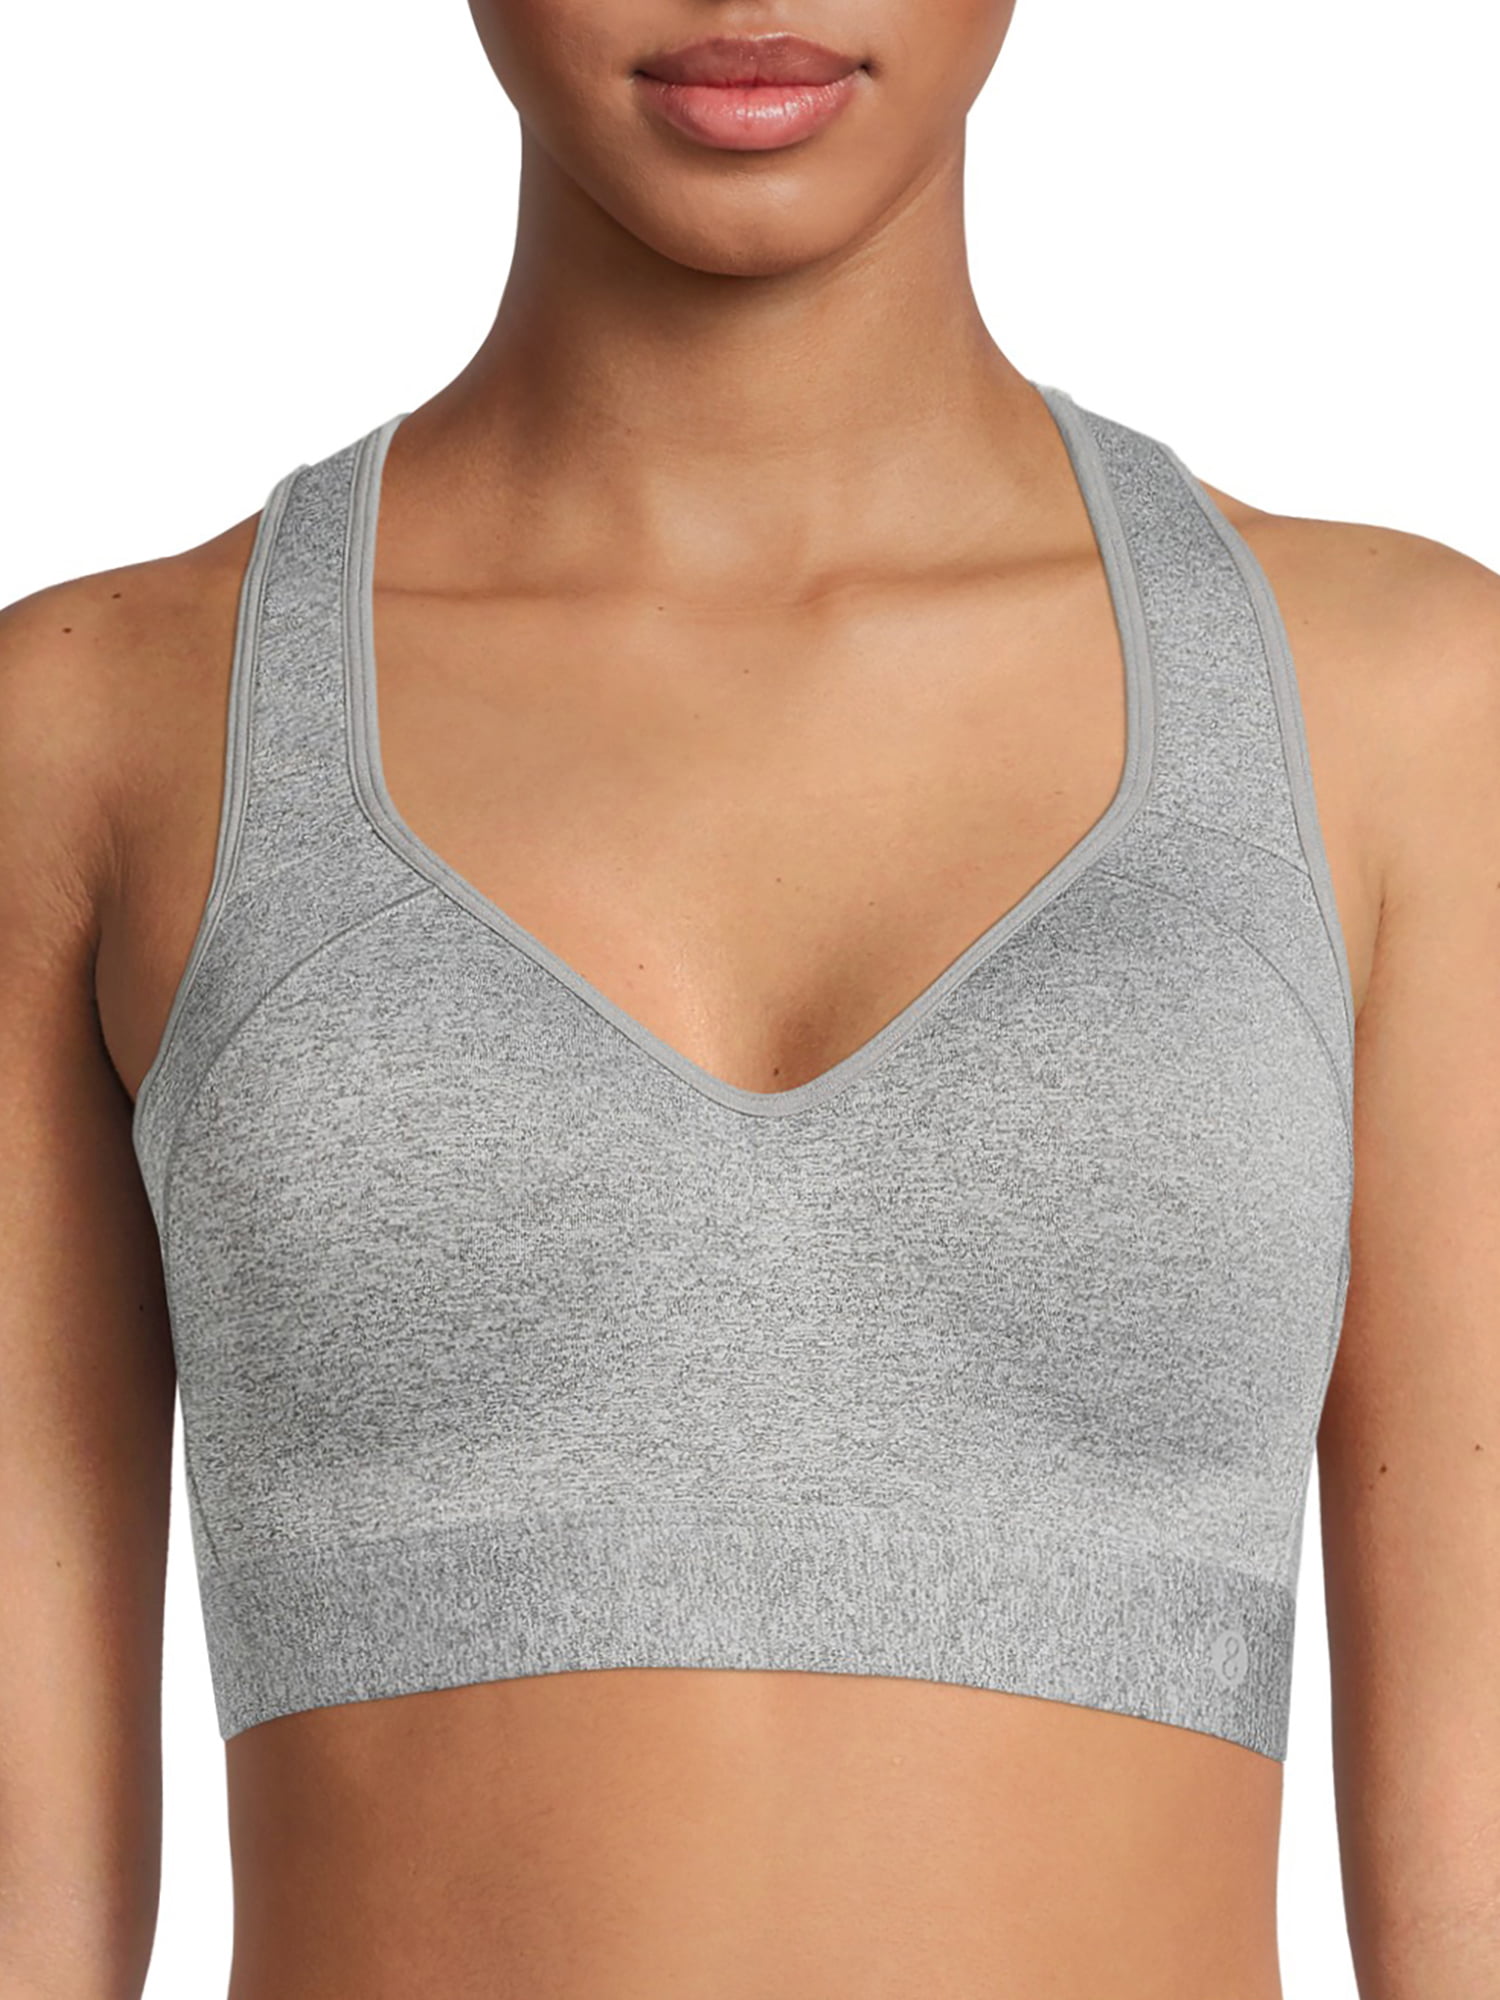 Layer 8 New Womens Performance Max Support Sports Bra